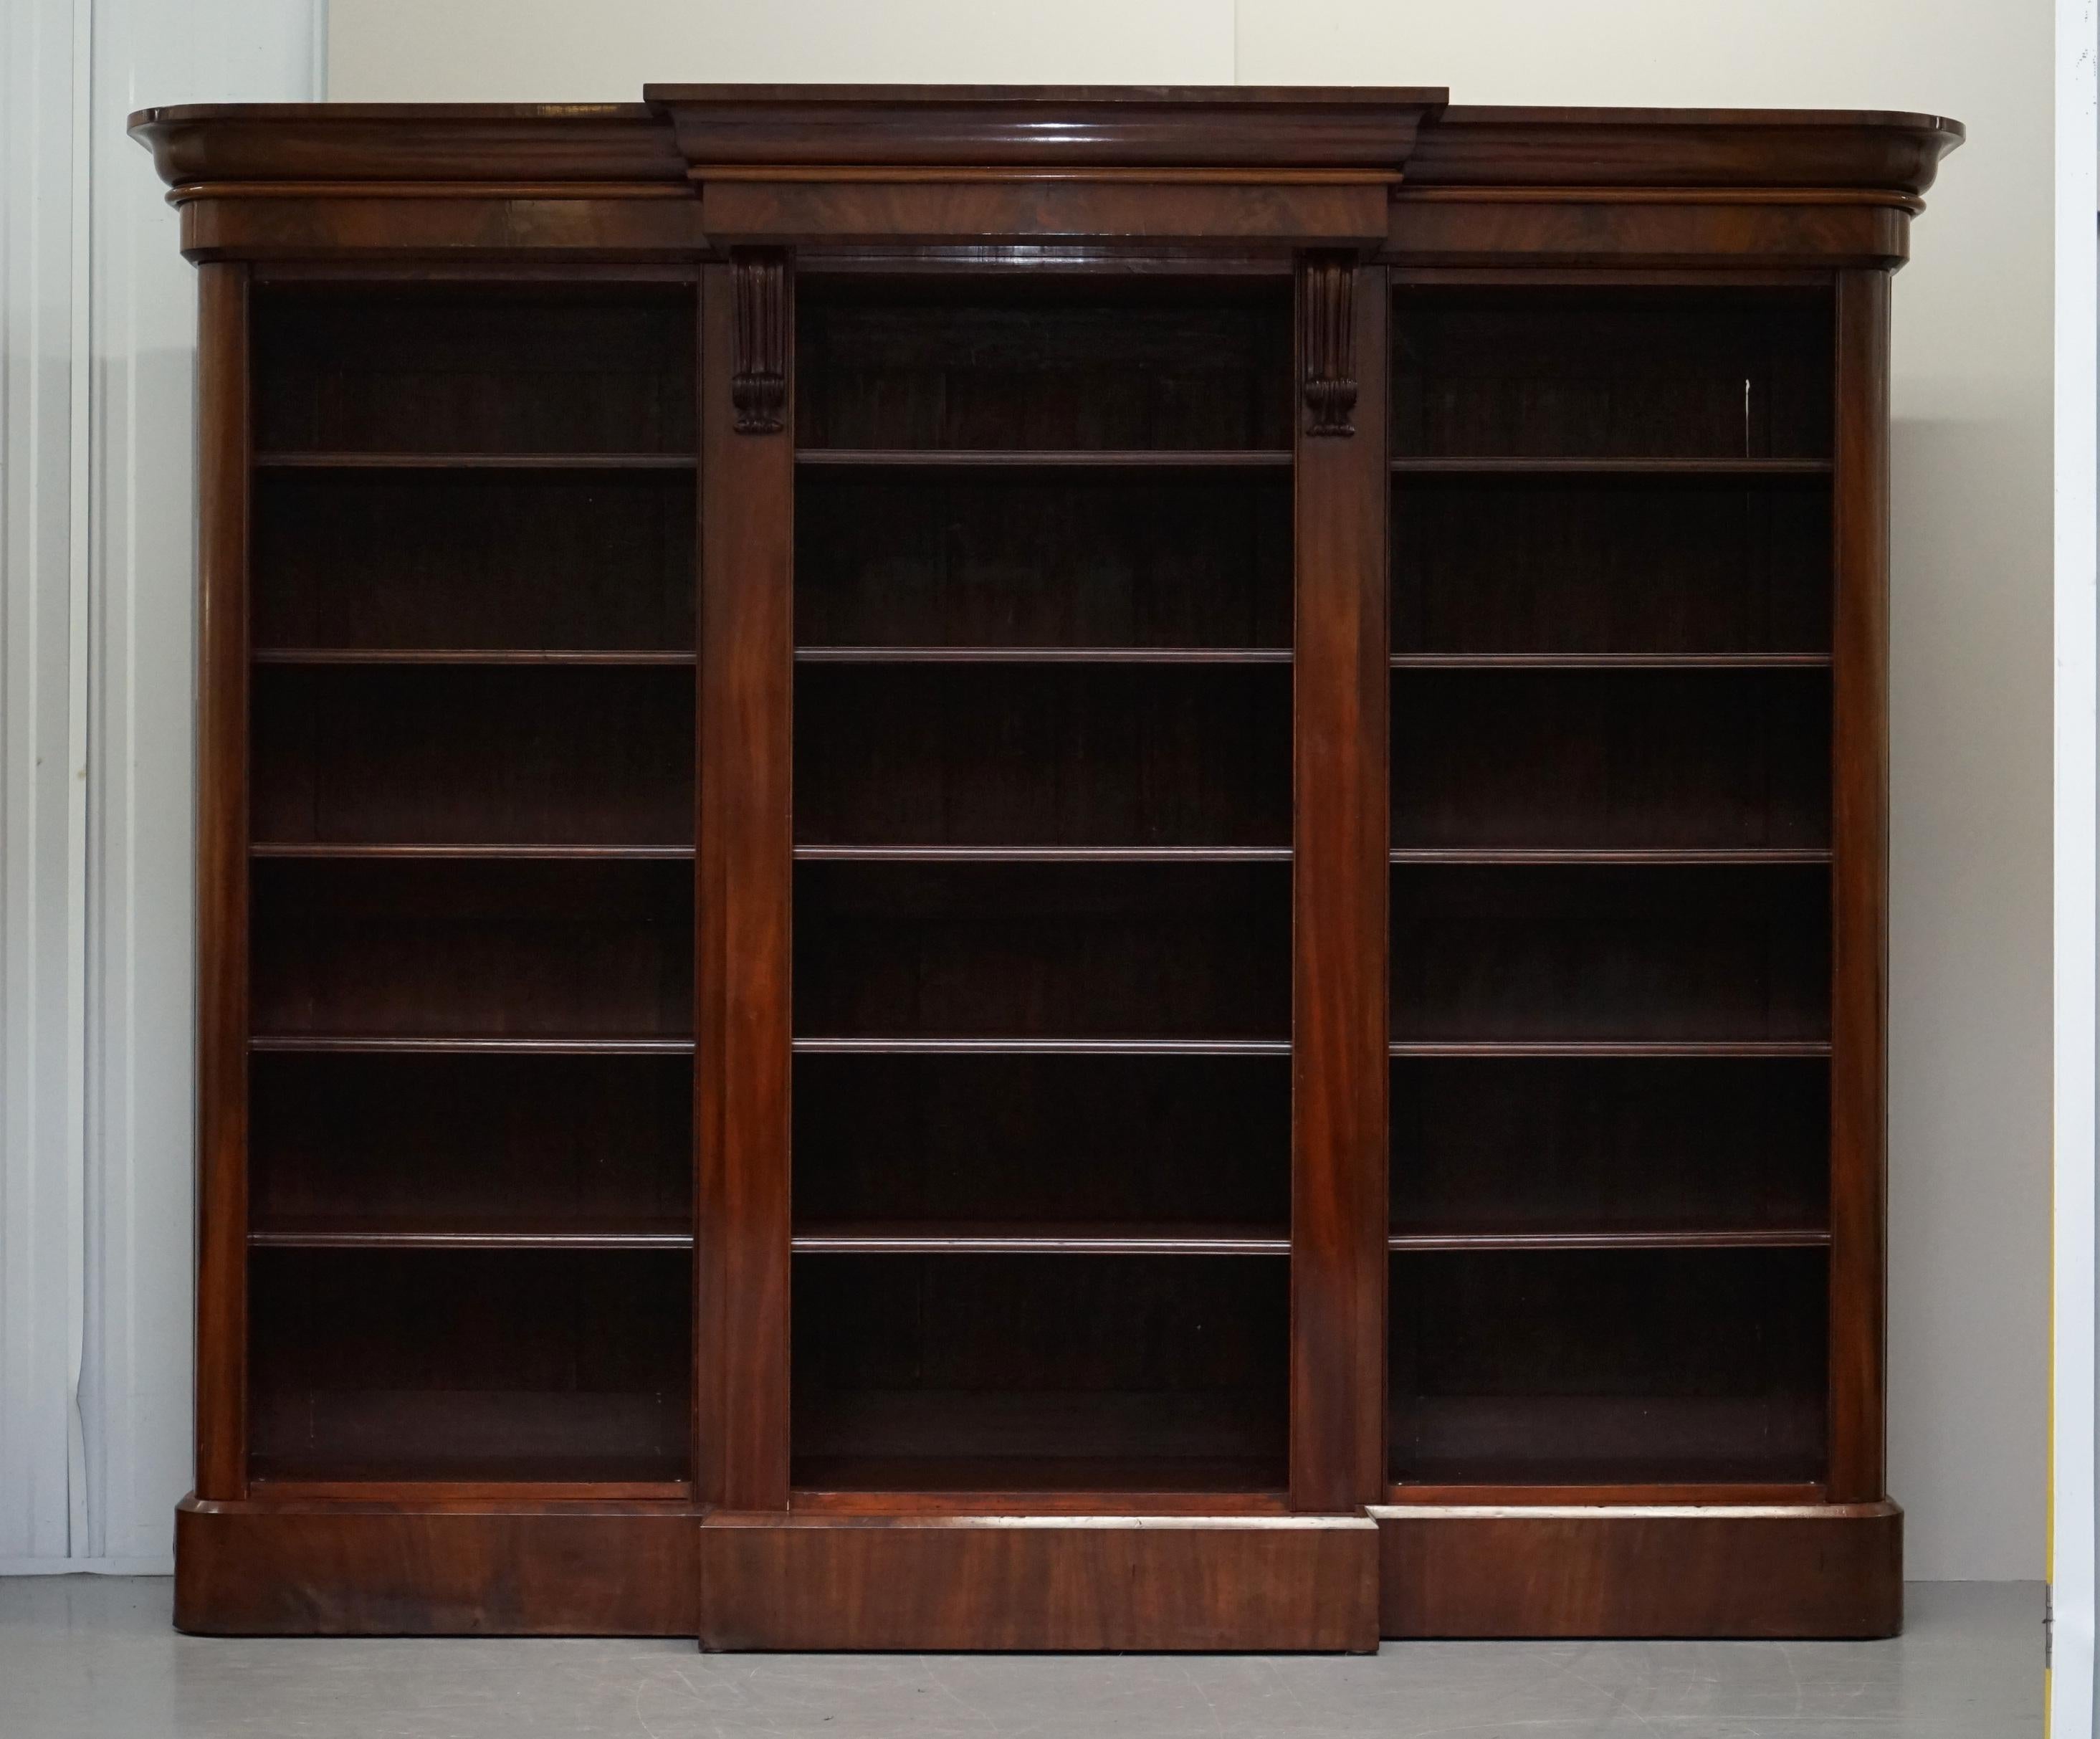 Wimbledon-Furniture

Wimbledon-Furniture is delighted to offer for sale this absolutely sublime mid Victorian circa 1860 light mahogany library breakfront bookcase 

Please note the delivery fee listed is just a guide, it covers within the M25